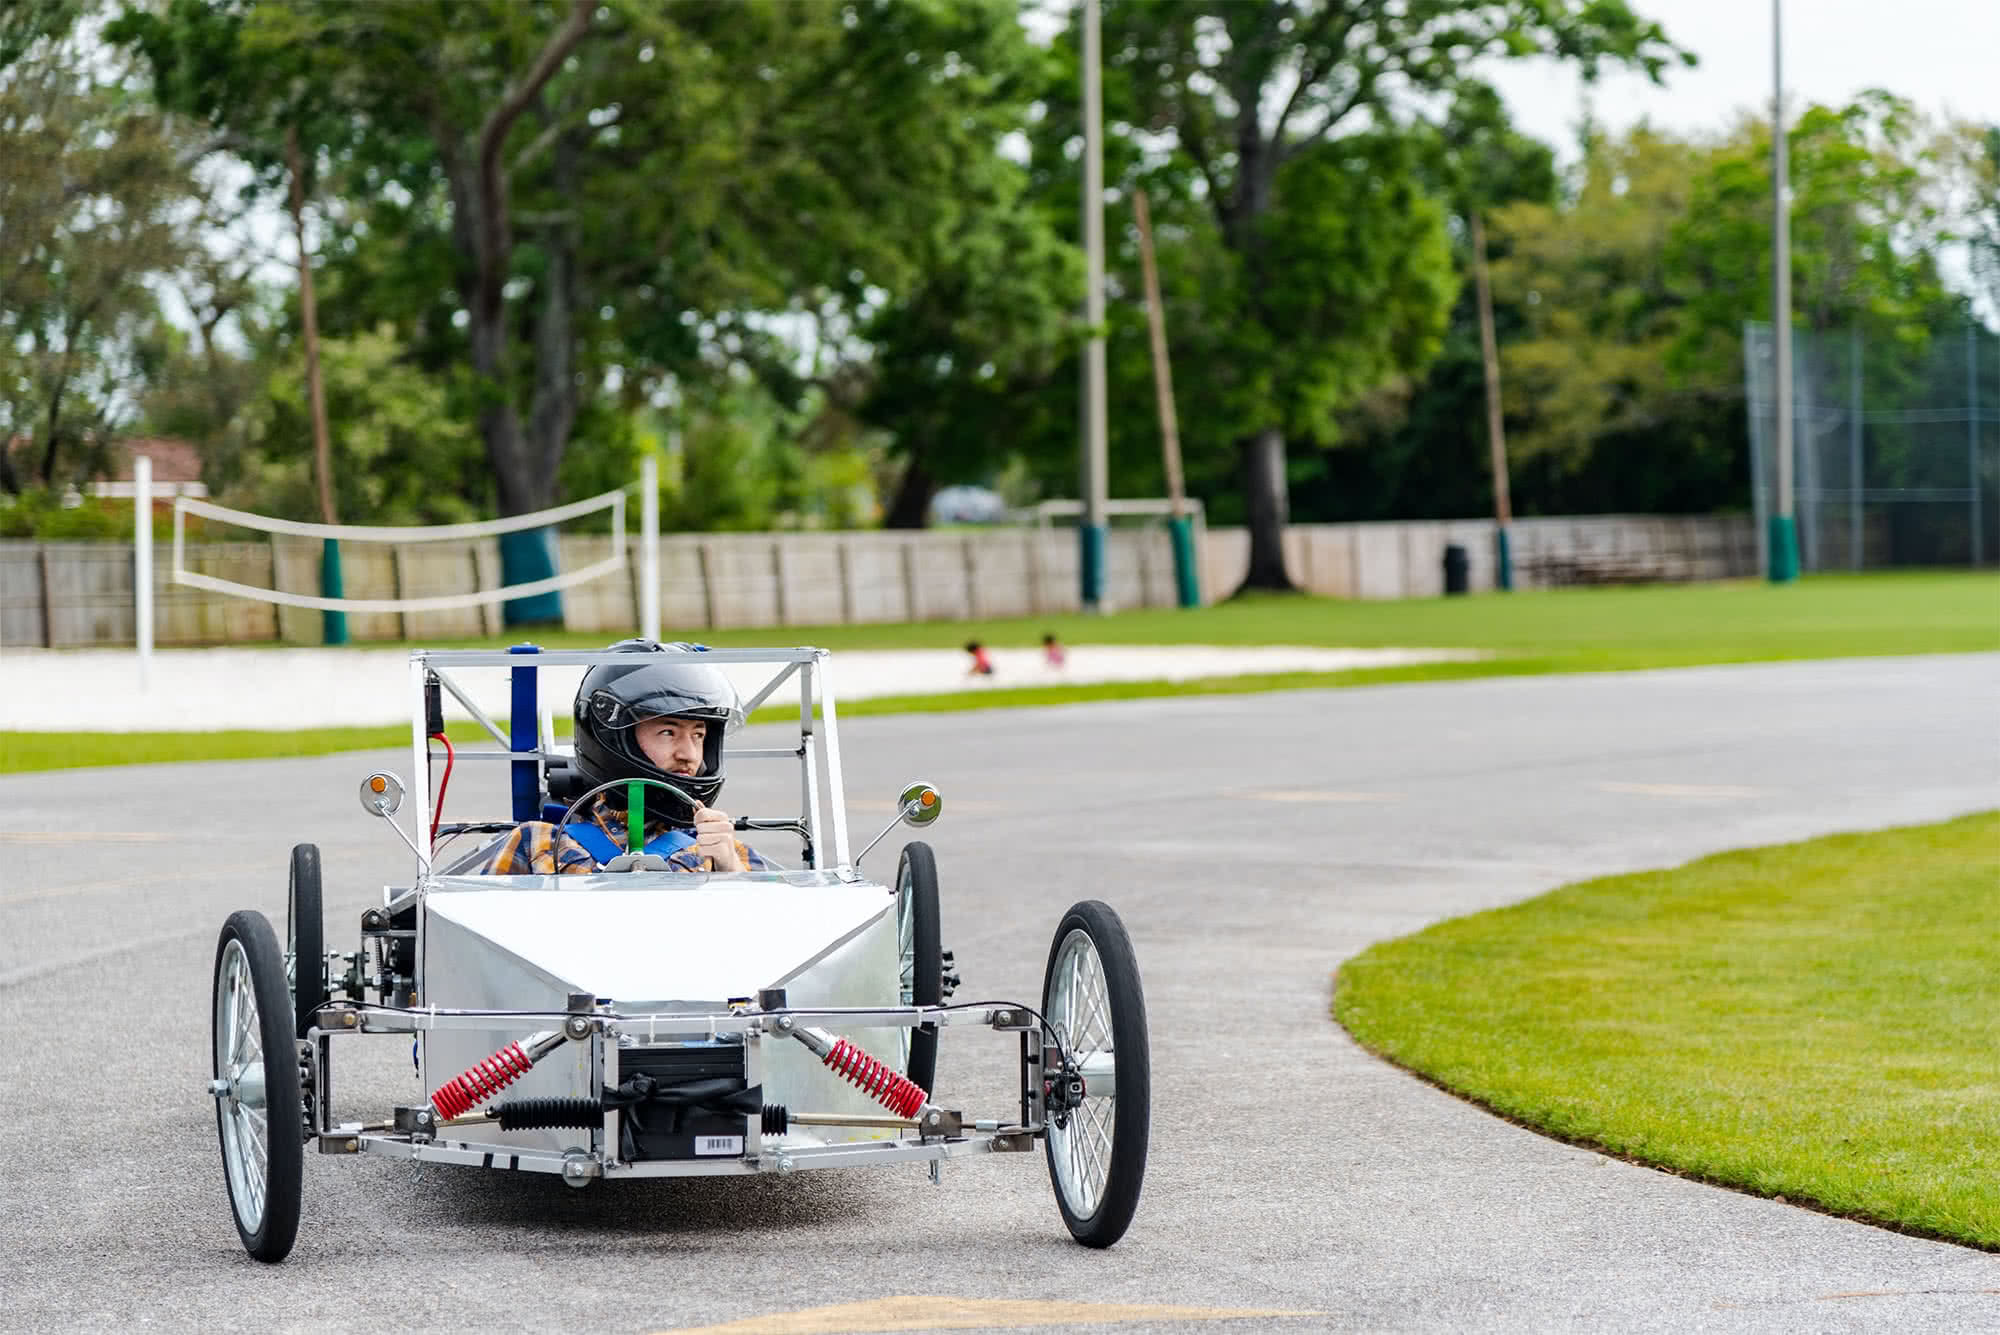 Student making a turn in a silver electric vehicle while wearing a helmet. 